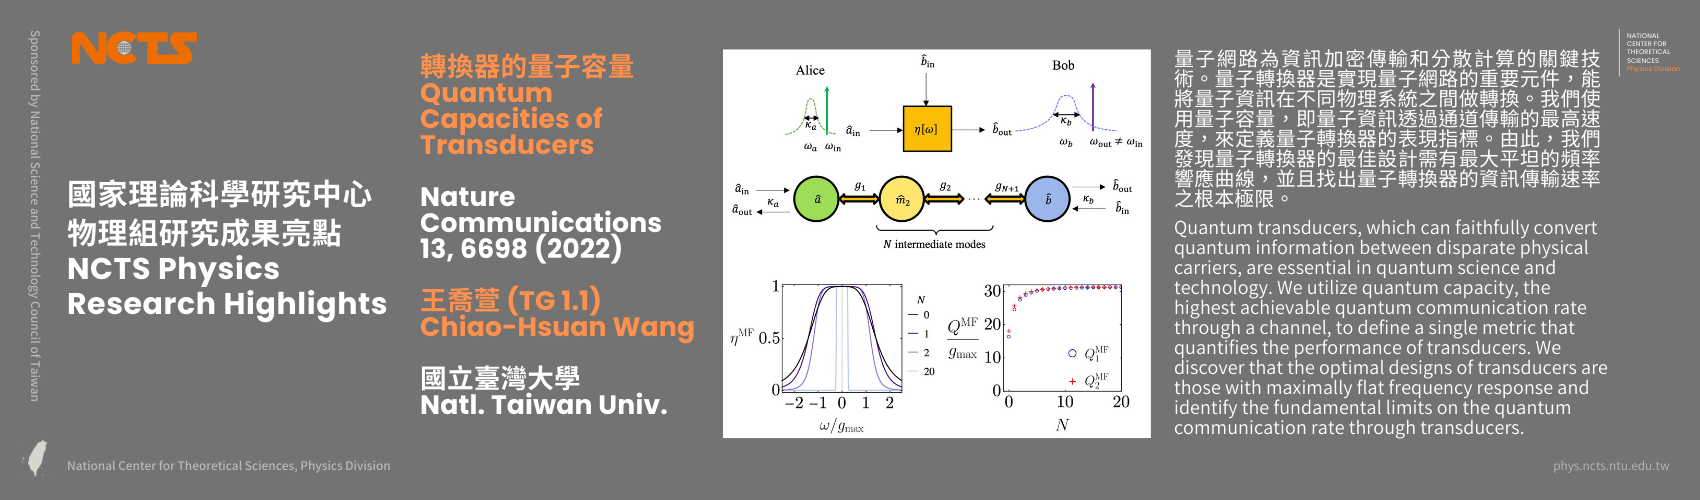 [NCTS Physics Research Highlights] Chiao-Hsuan Wang 'Quantum Capacities of Transducers', Nature Communications 13, 6698 (2022)